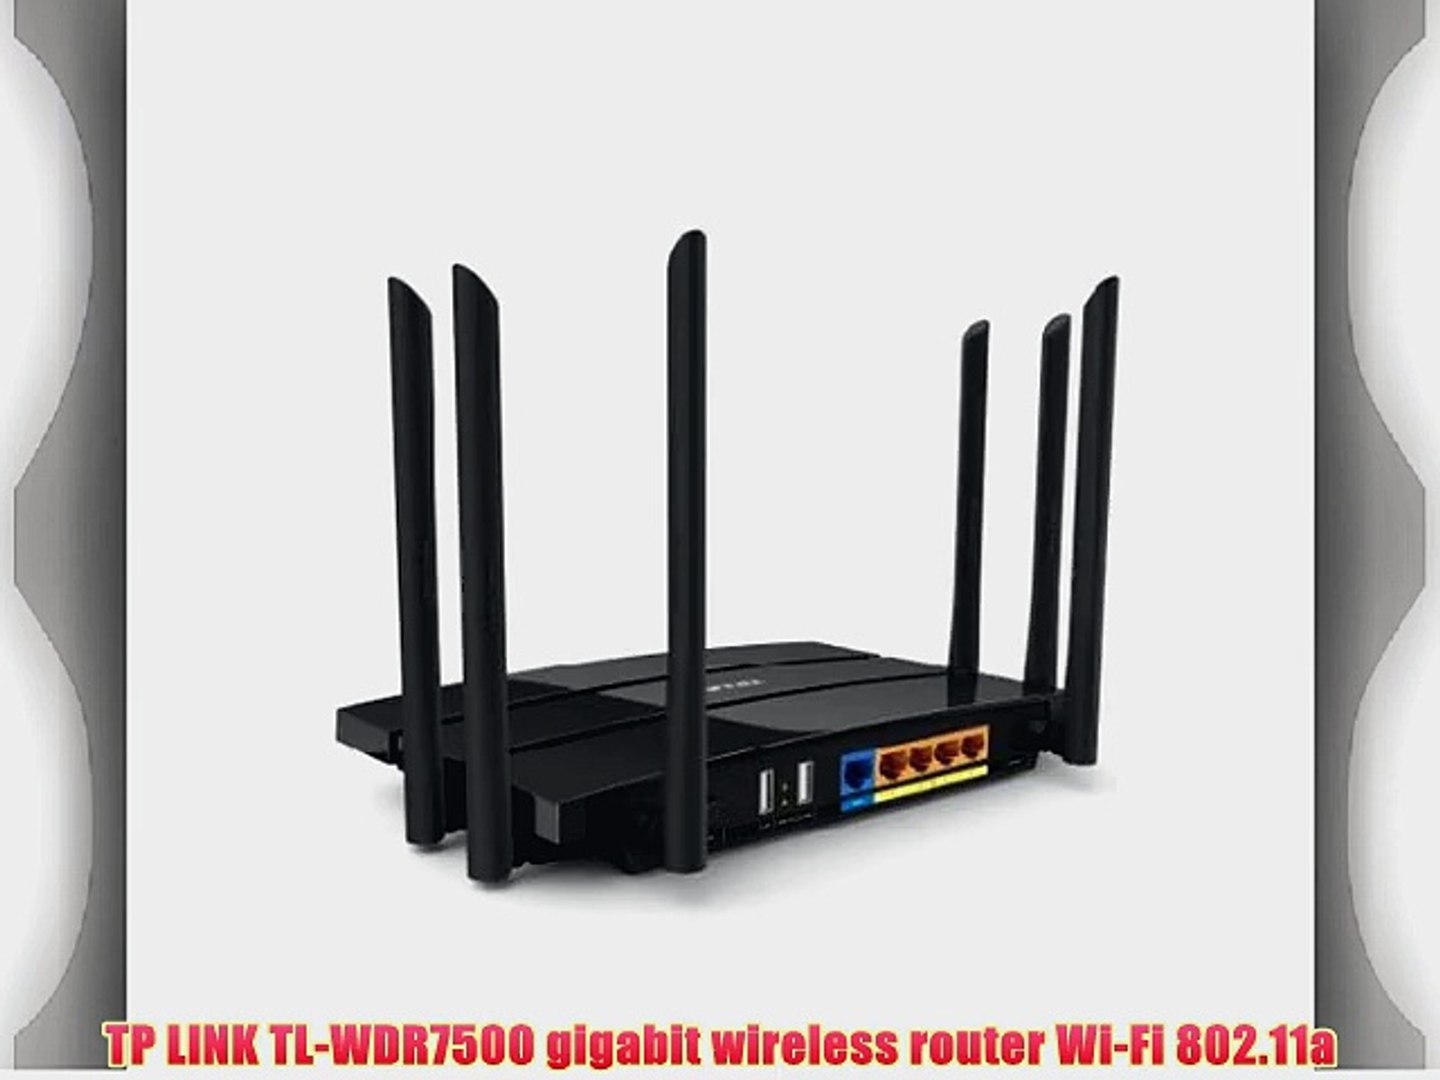 TP LINK TL-WDR7500 gigabit wireless router Wi-Fi 802.11a - video Dailymotion